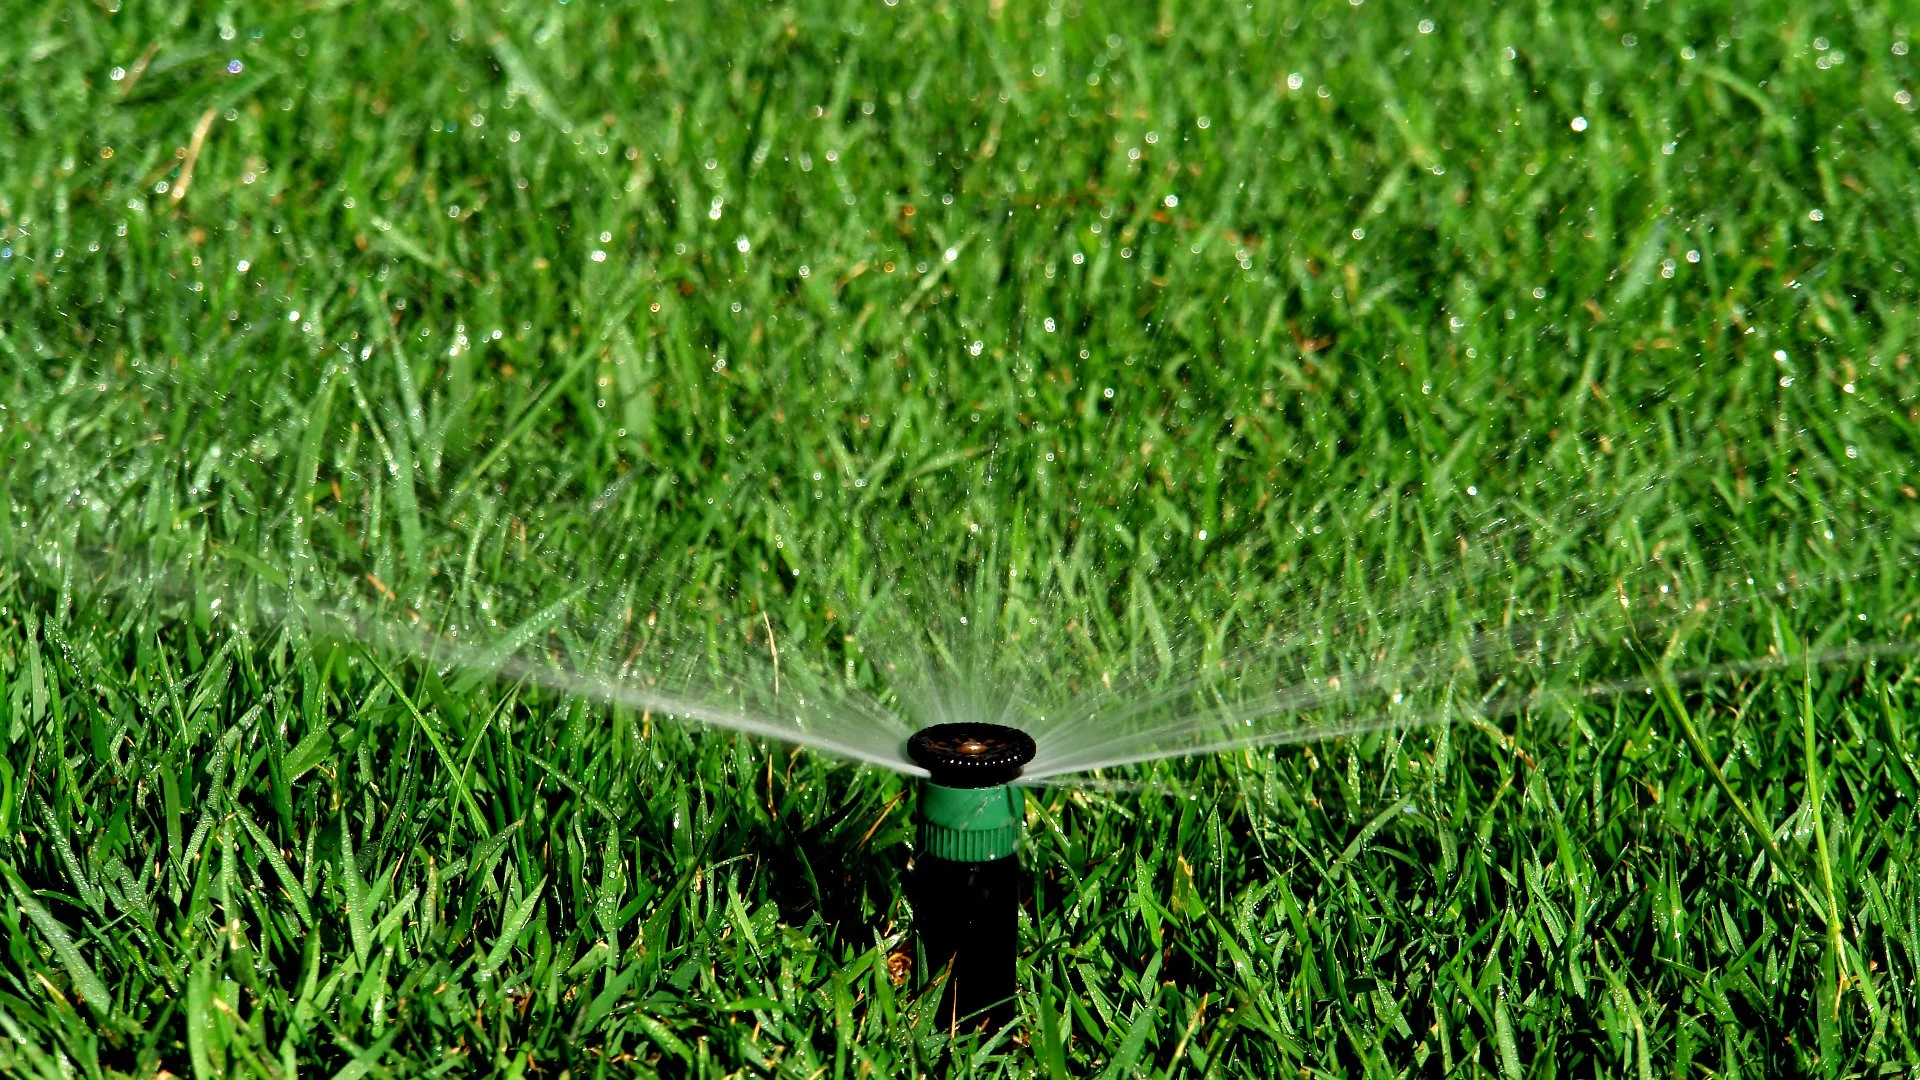 Sprinkler vs Drip Irrigation: Which Should You Choose for Your Property?